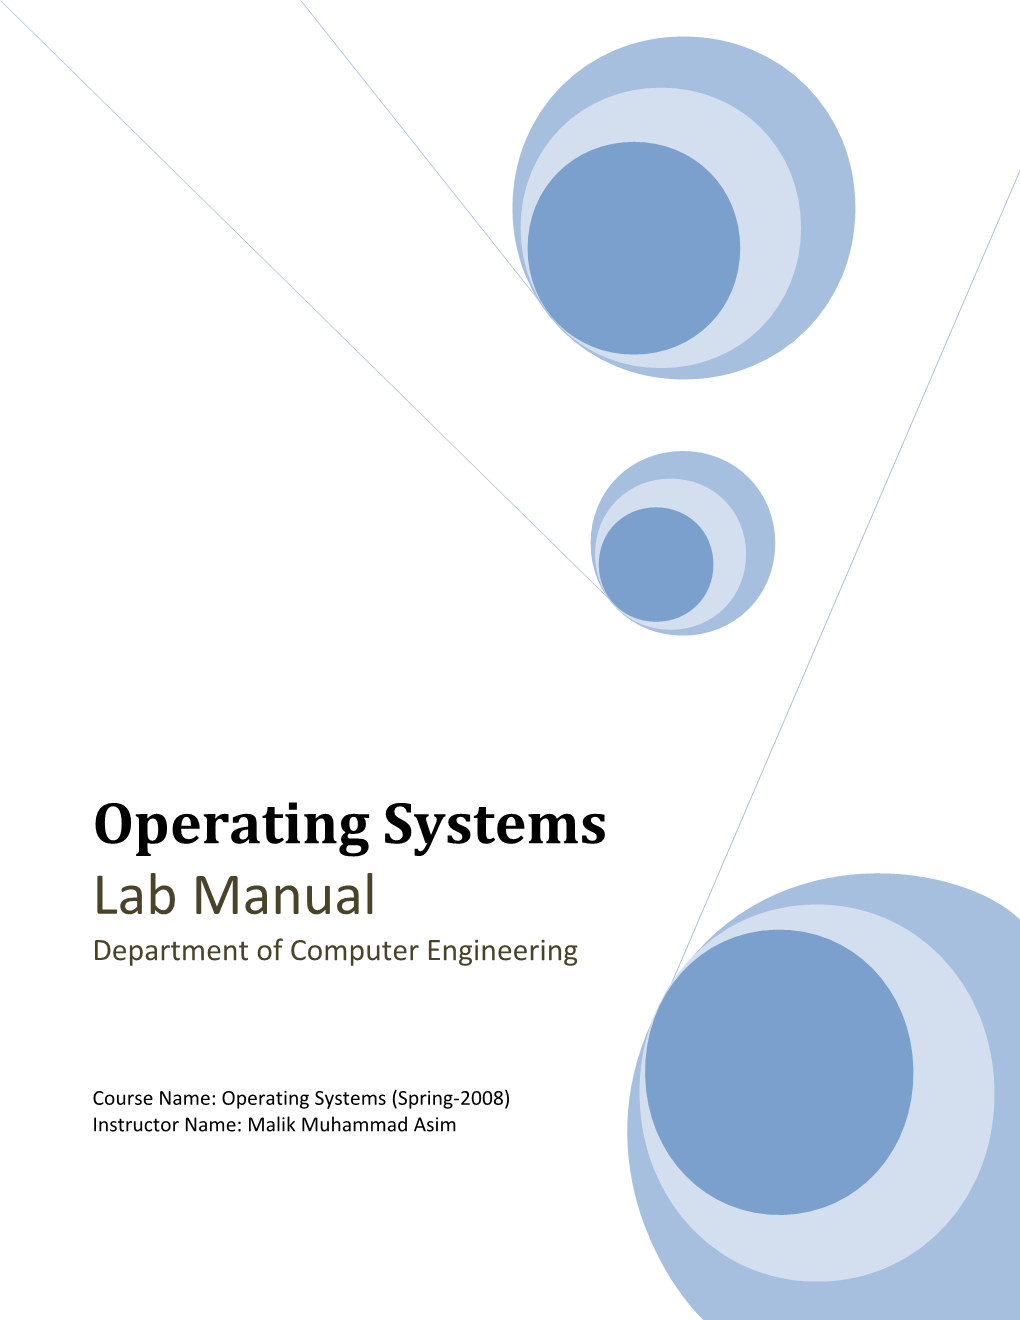 Operating Systems (Spring-2008)